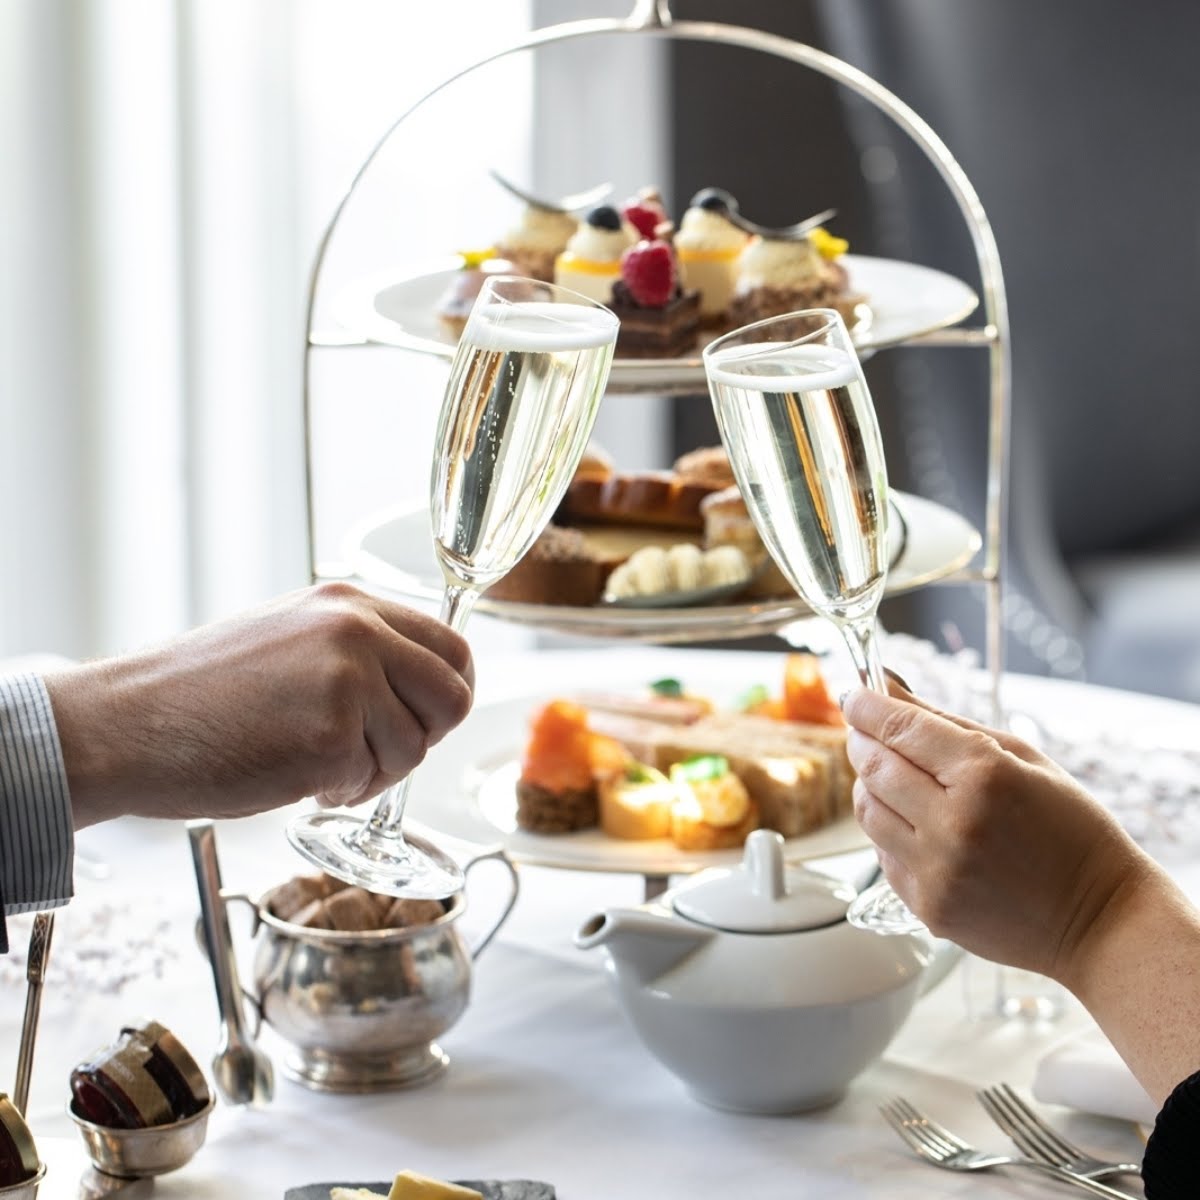 Prosecco Afternoon Tea for Two People at Hayfield Manor, €130